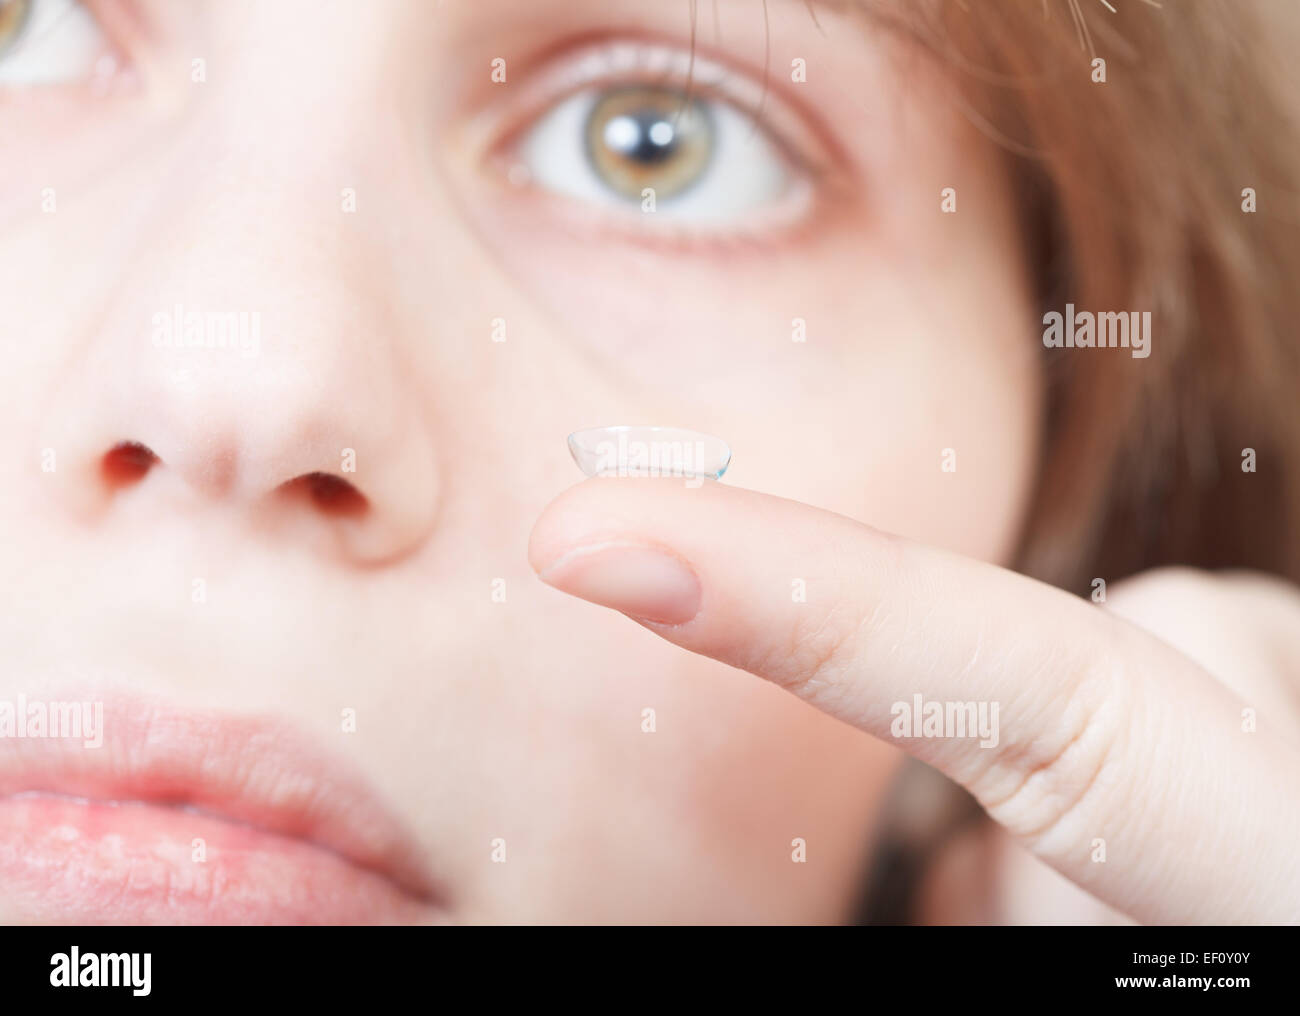 finger with corrective lens close up and female face backhround Stock Photo